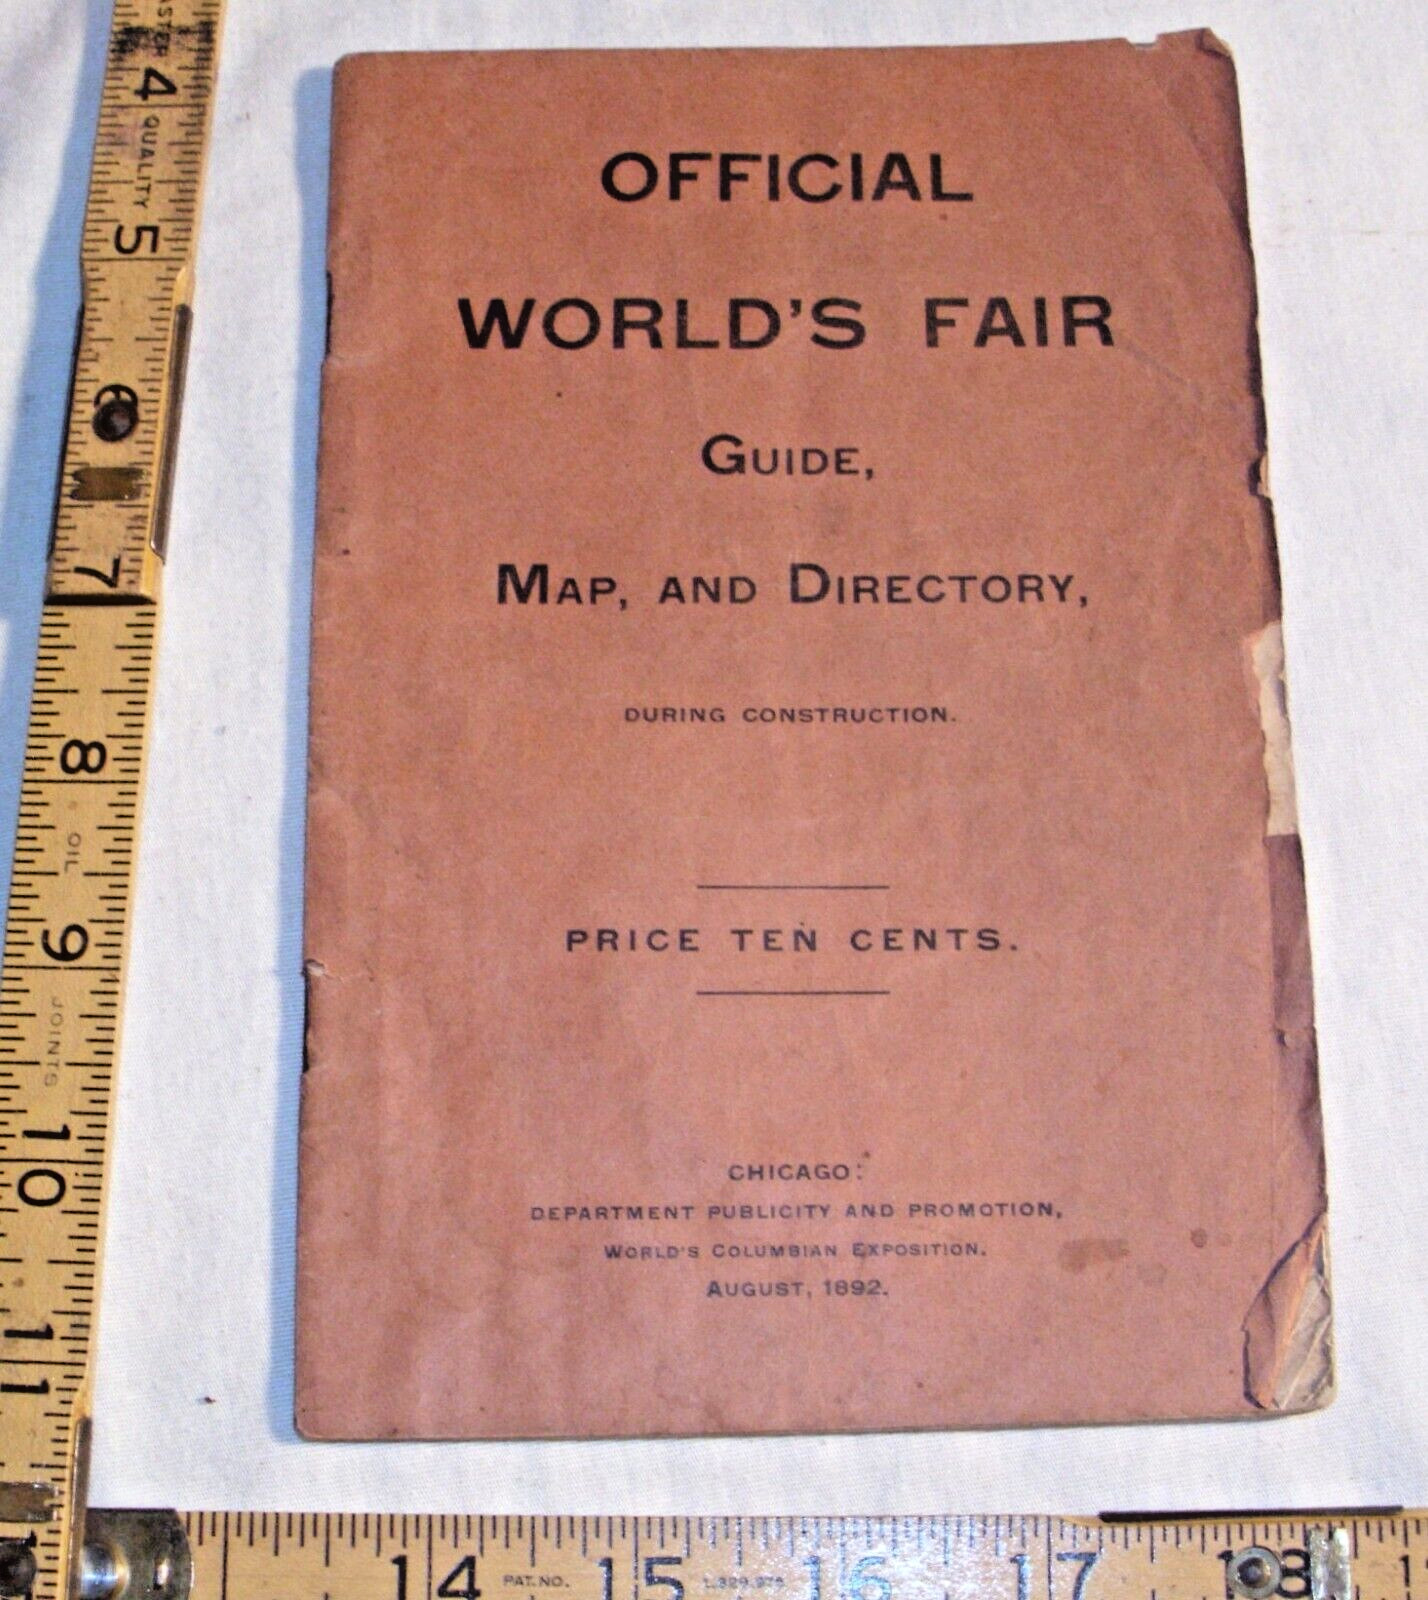 WORLD'S COLUMBIA EXPOSITION 1892 OFFICIAL WORLDS FAIR MAP AND DIRECTORY BOOKLET